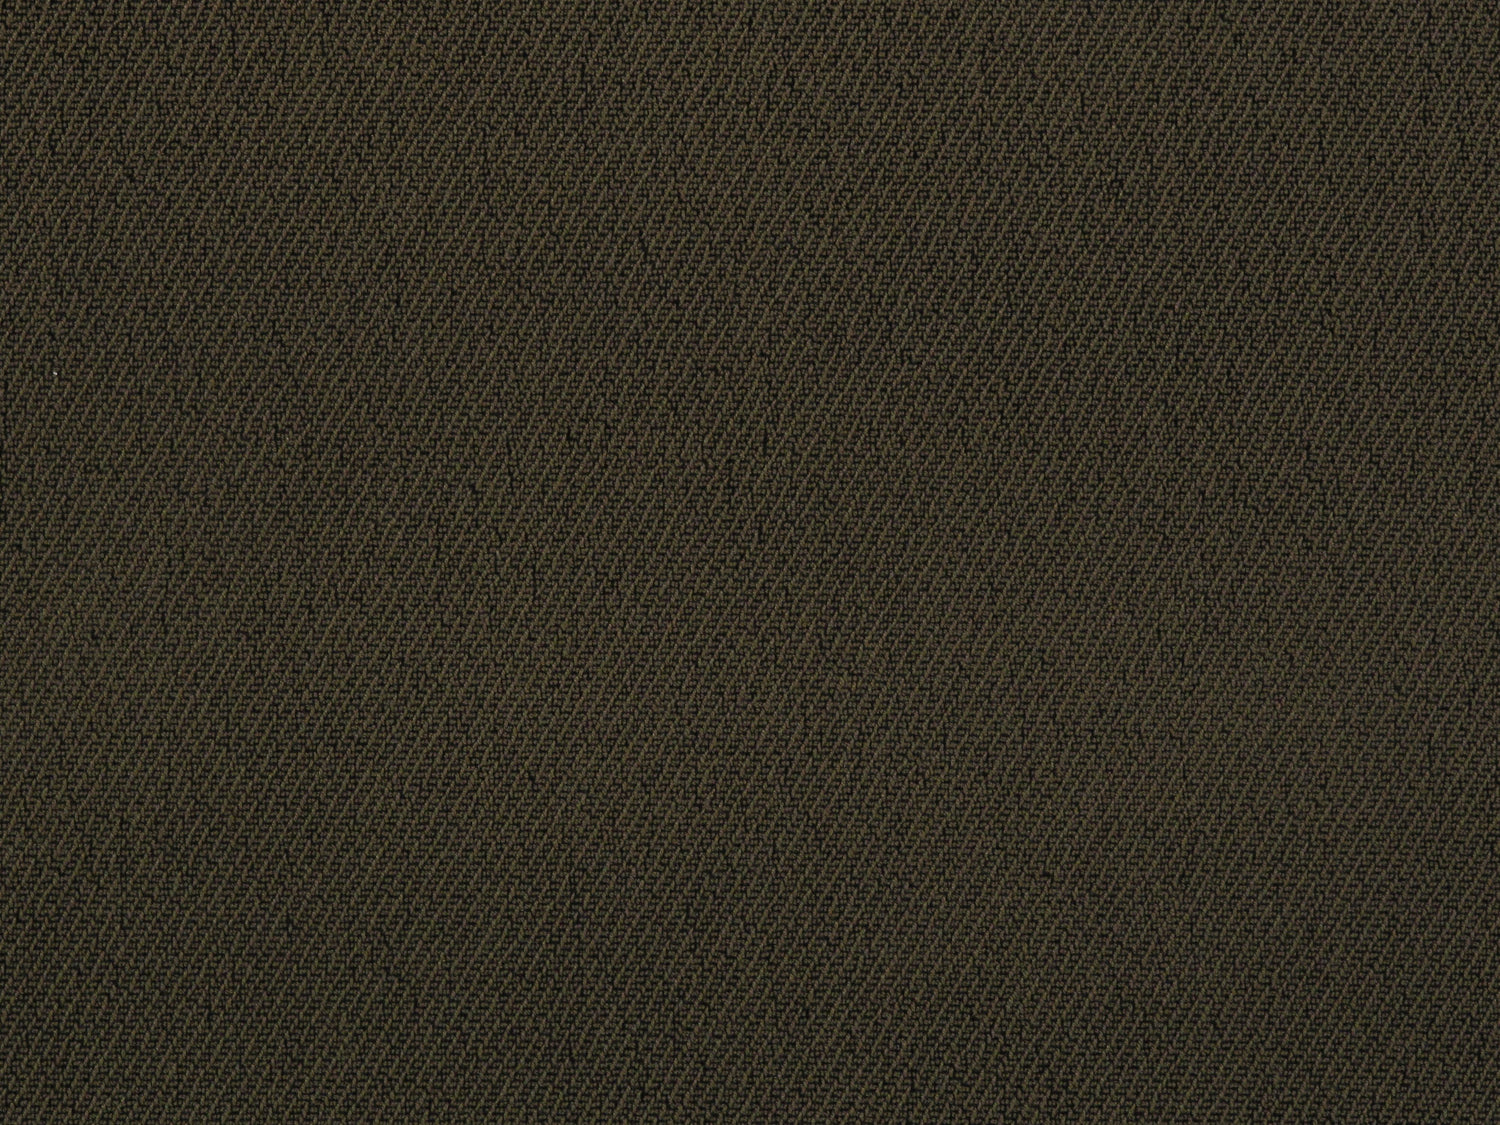 Brandenburg fabric in army green color - pattern number RH 00131314 - by Scalamandre in the Old World Weavers collection